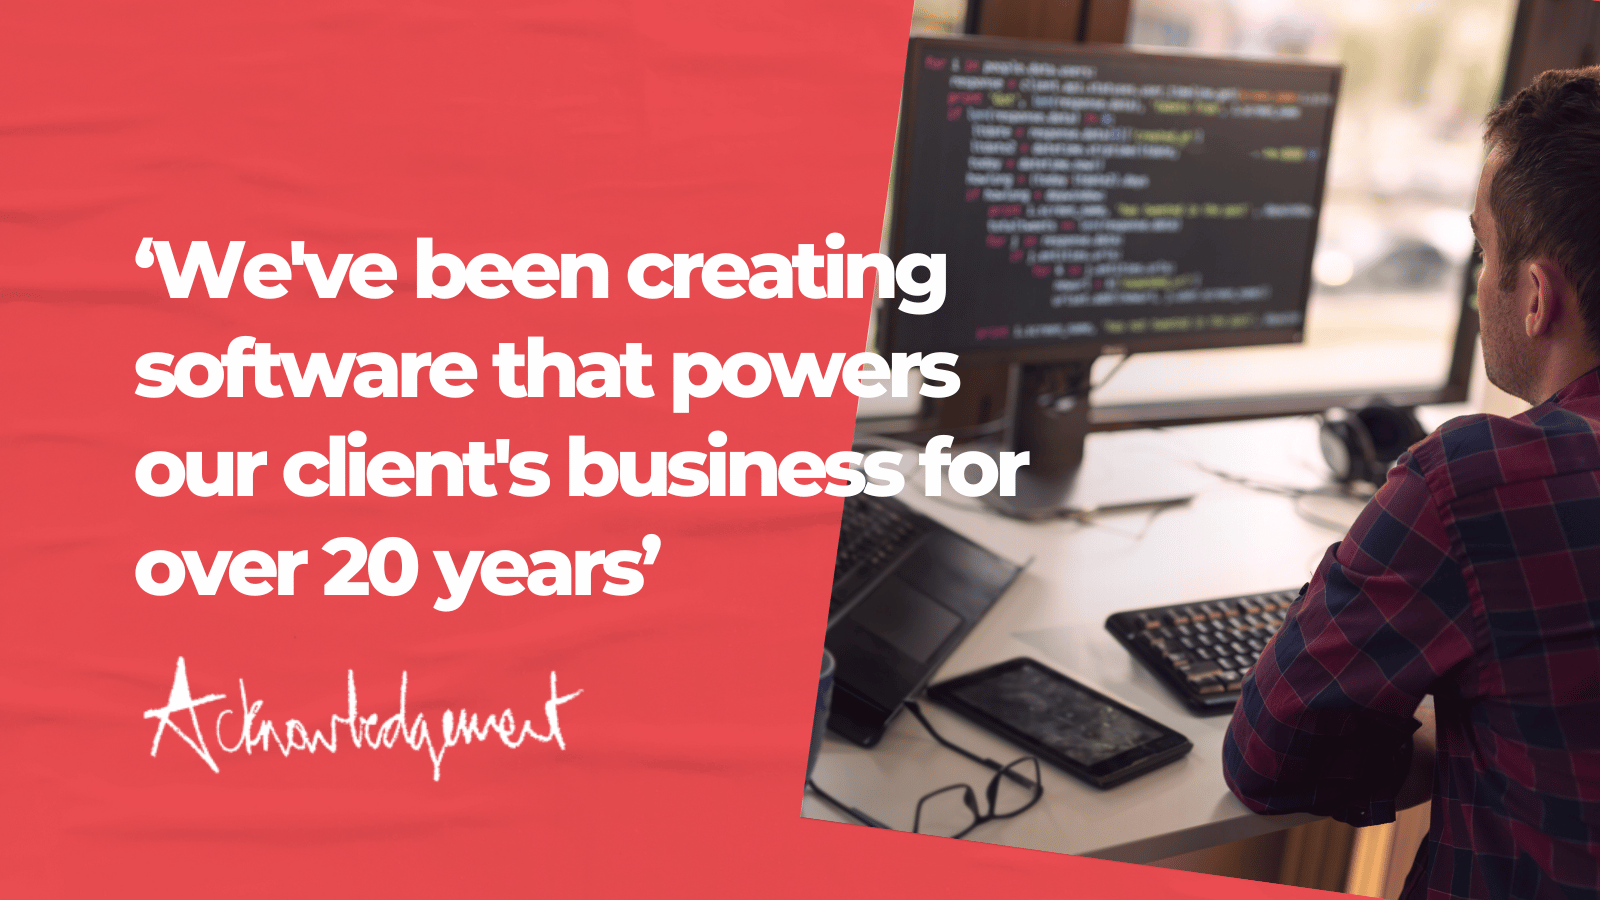 "We've been creating software that powers our client's business for over 20 years"